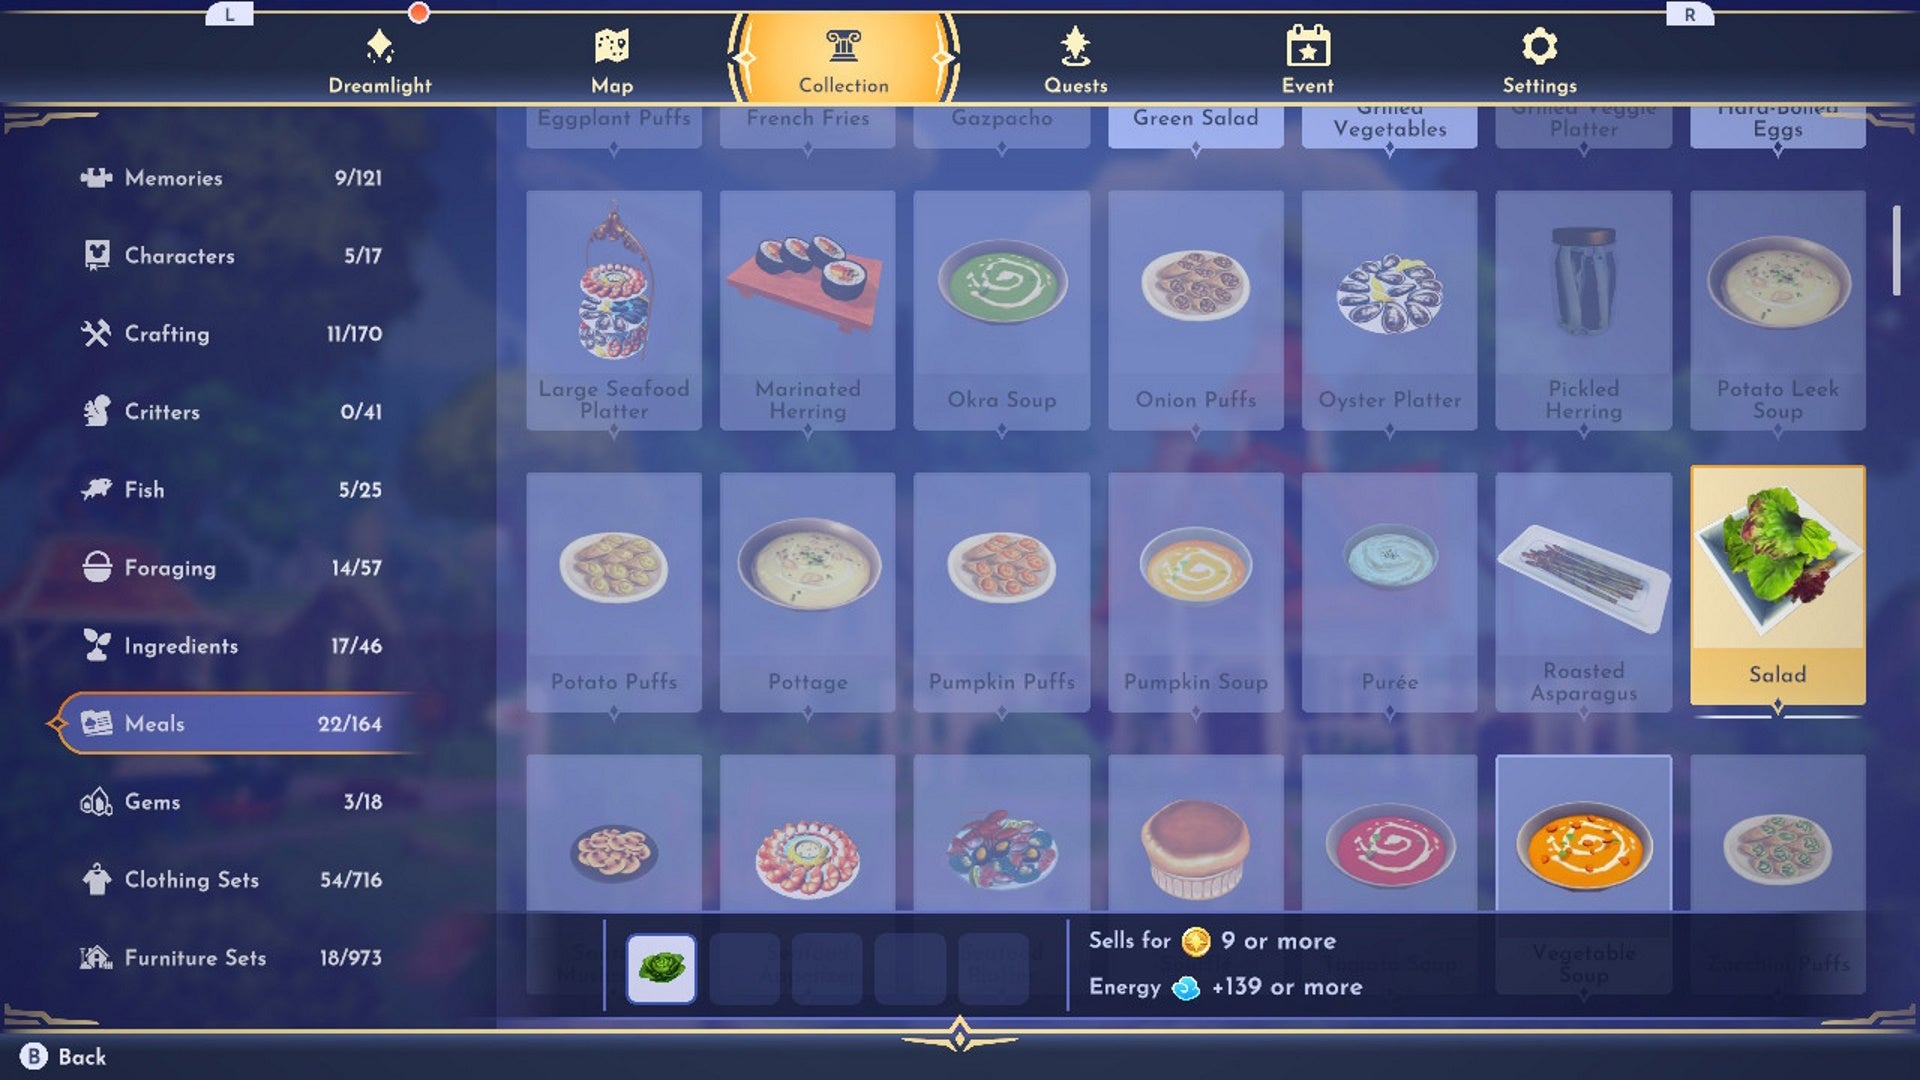 Disney Dreamlight Valley recipes list, best recipes for 3 star, 4 star, 5 star objectives and more